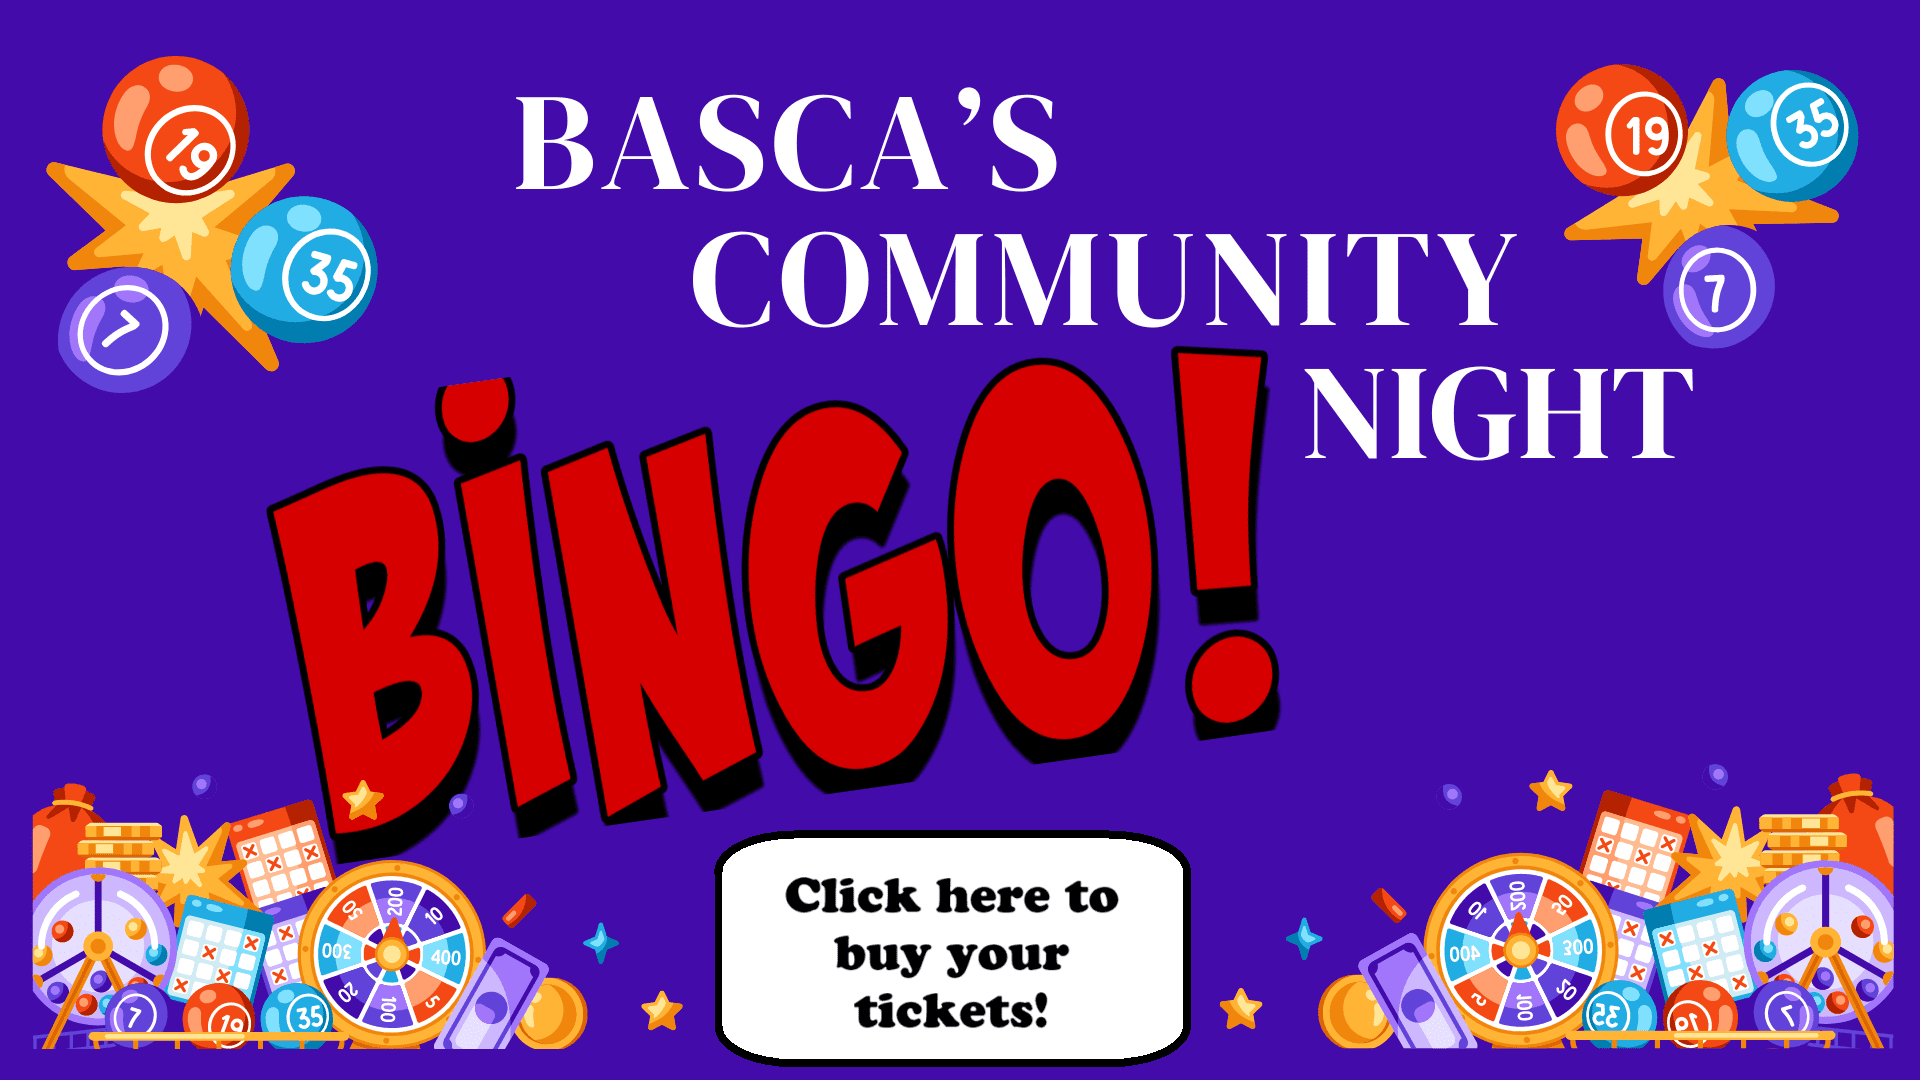 Basca's Community Bingo Night! Click here to buy your tickets!